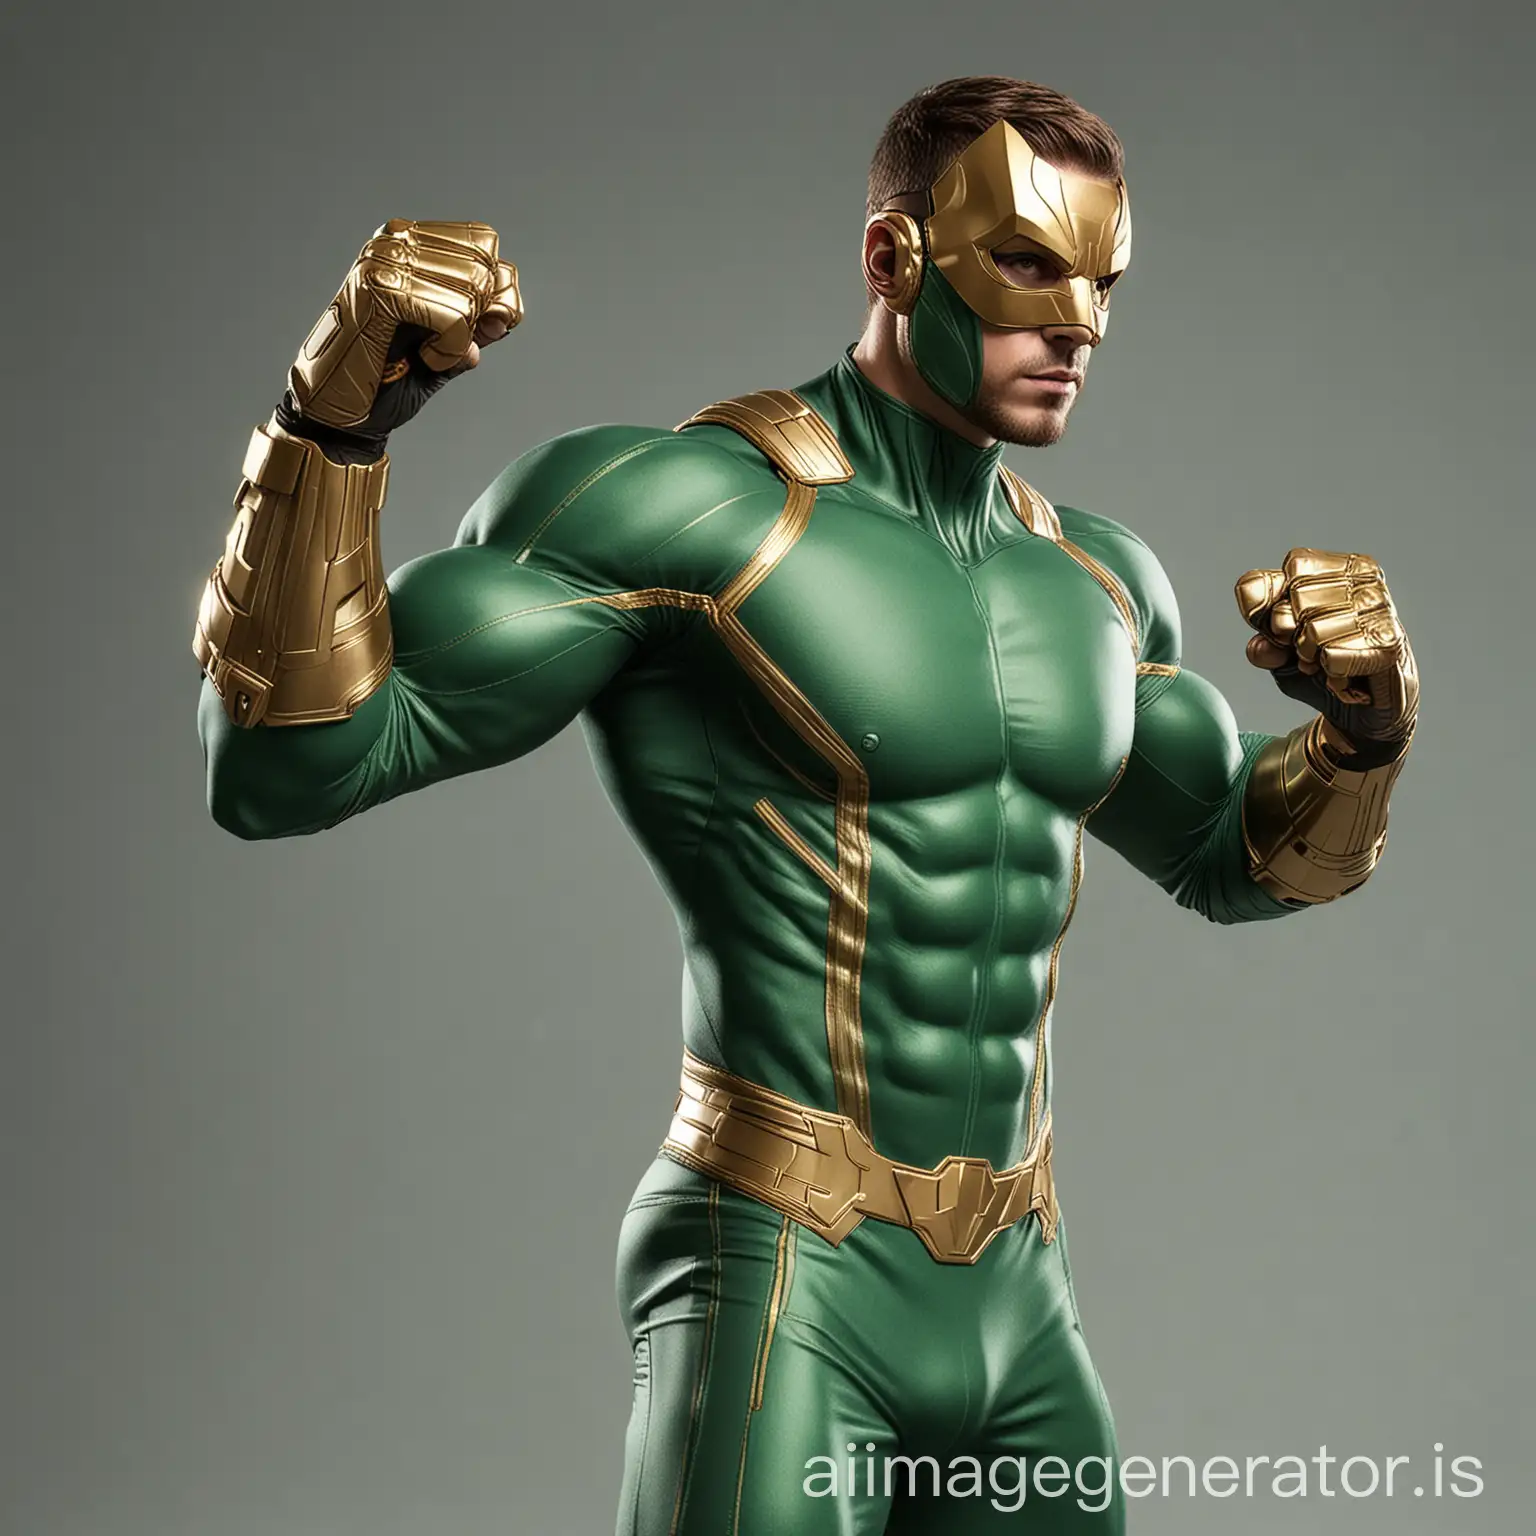 Muscular-Thin-Male-Superhero-in-Green-Suit-with-HiTech-Accessories